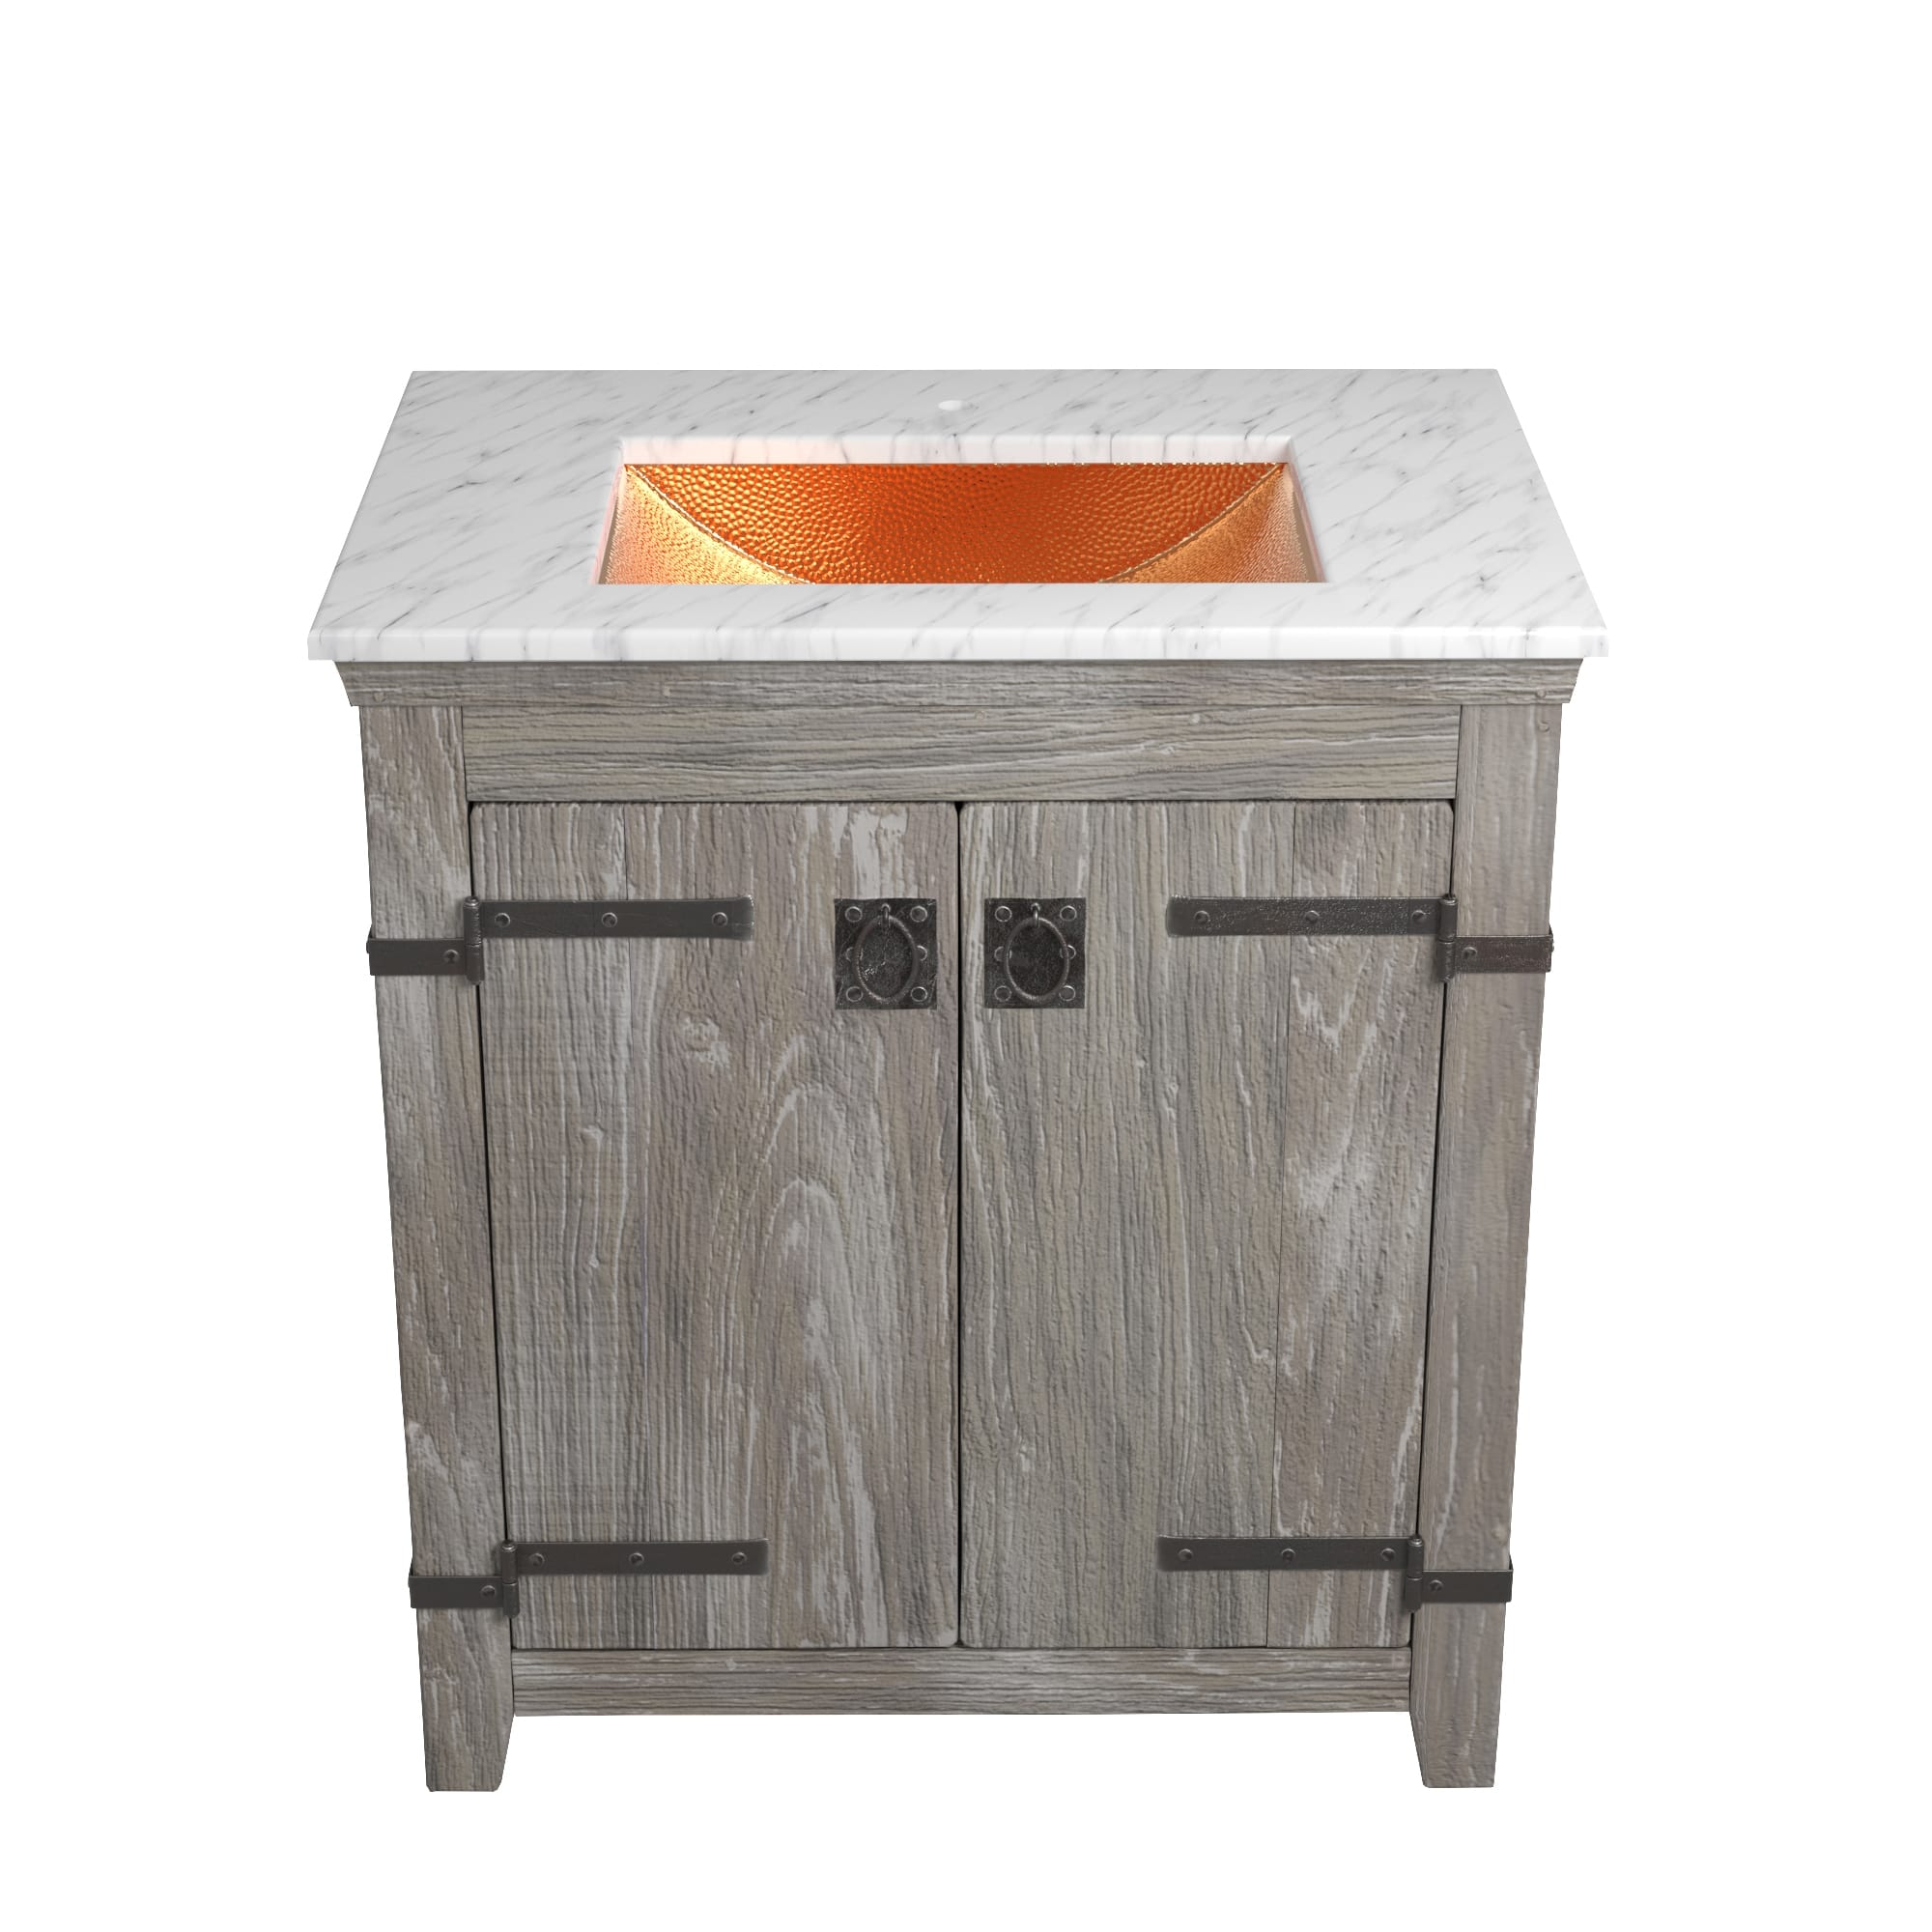 Native Trails 30" Americana Vanity in Driftwood with Carrara Marble Top and Avila in Polished Copper, Single Faucet Hole, BND30-VB-CT-CP-015